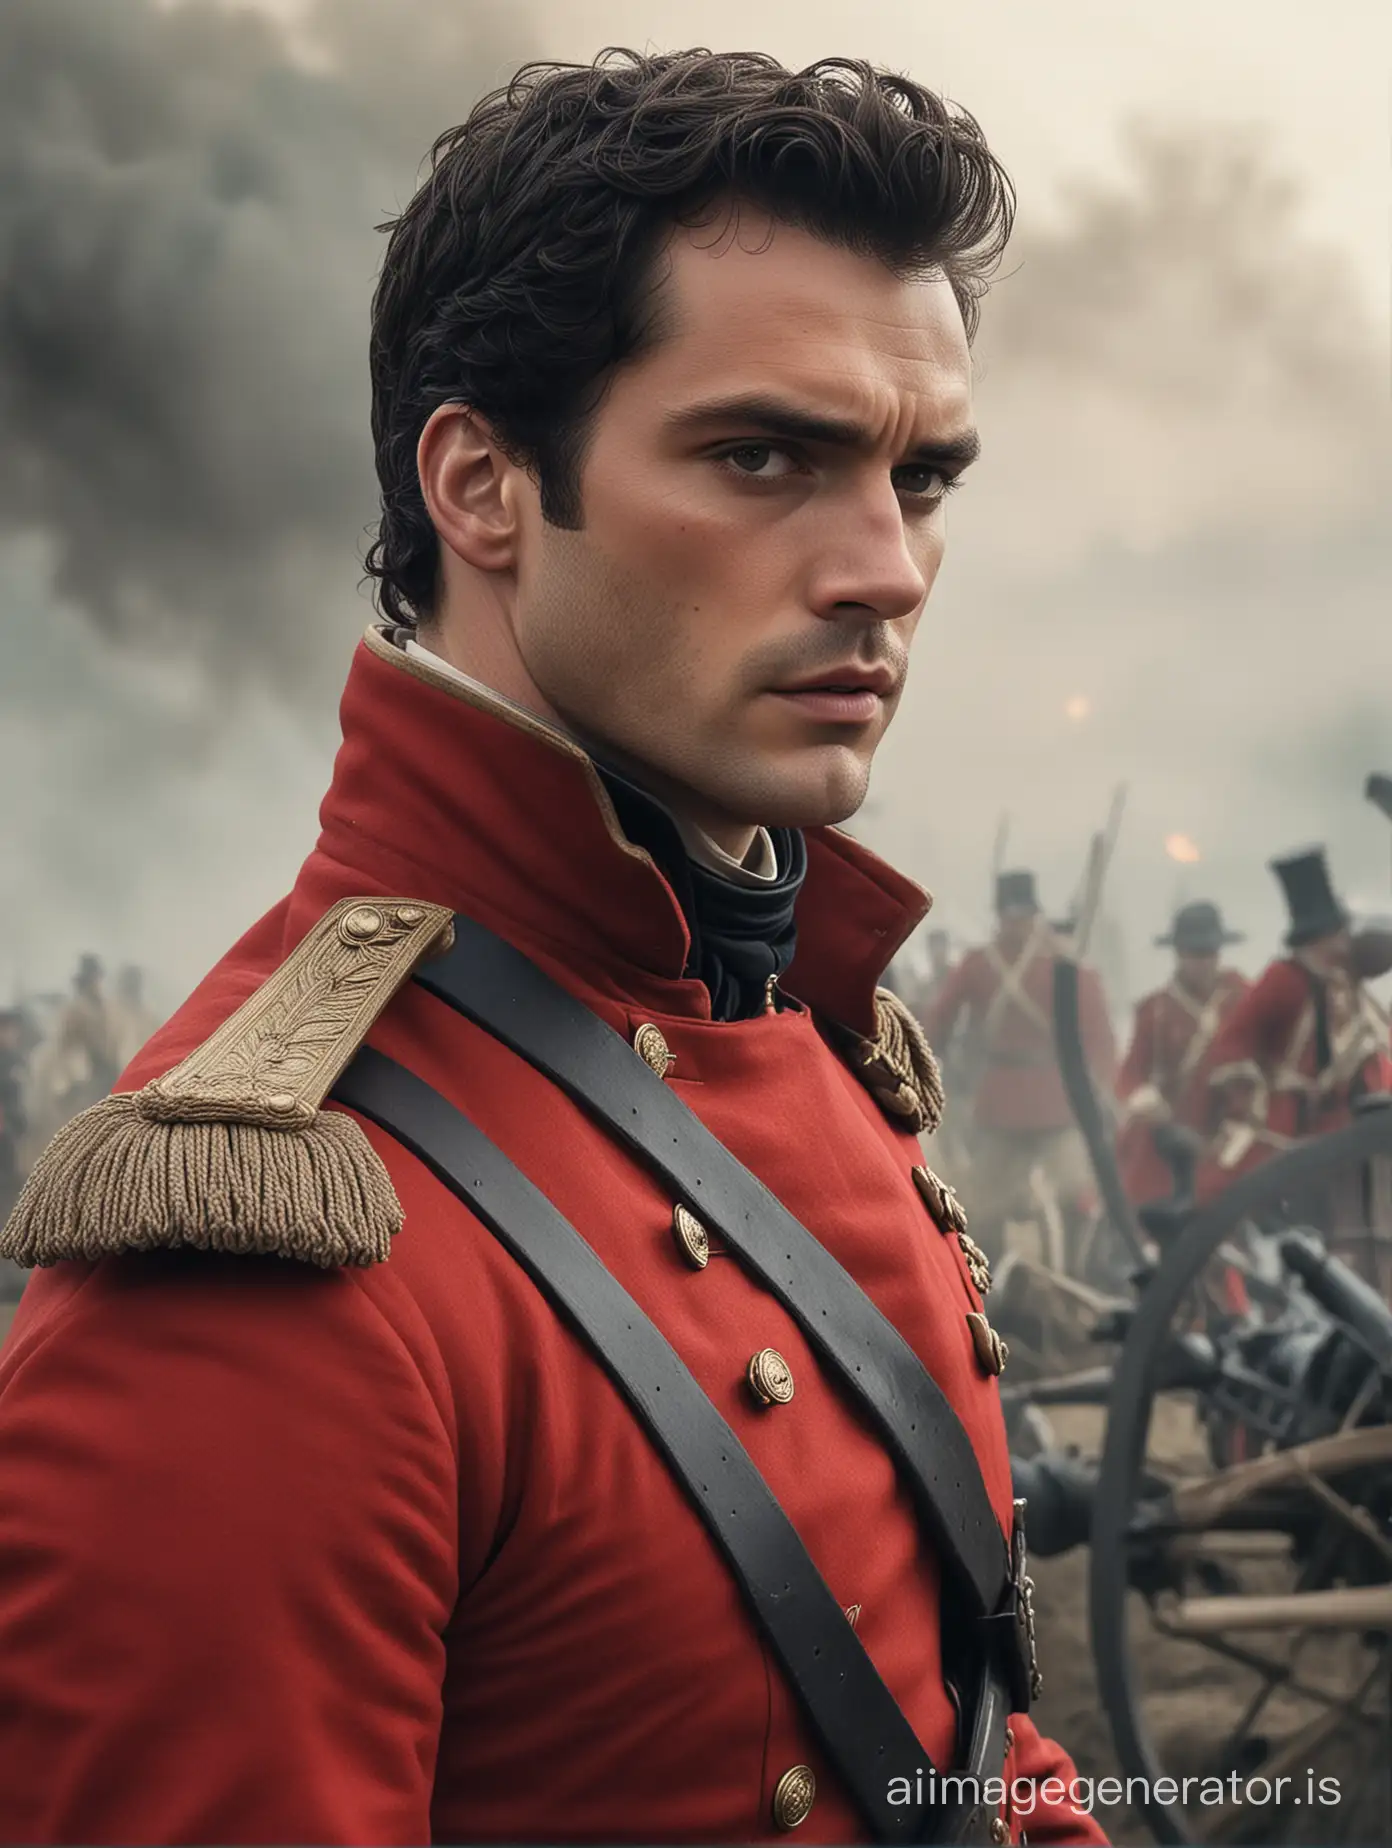 Portrait-of-a-Dashing-English-Officer-Amidst-the-Chaos-of-Battle